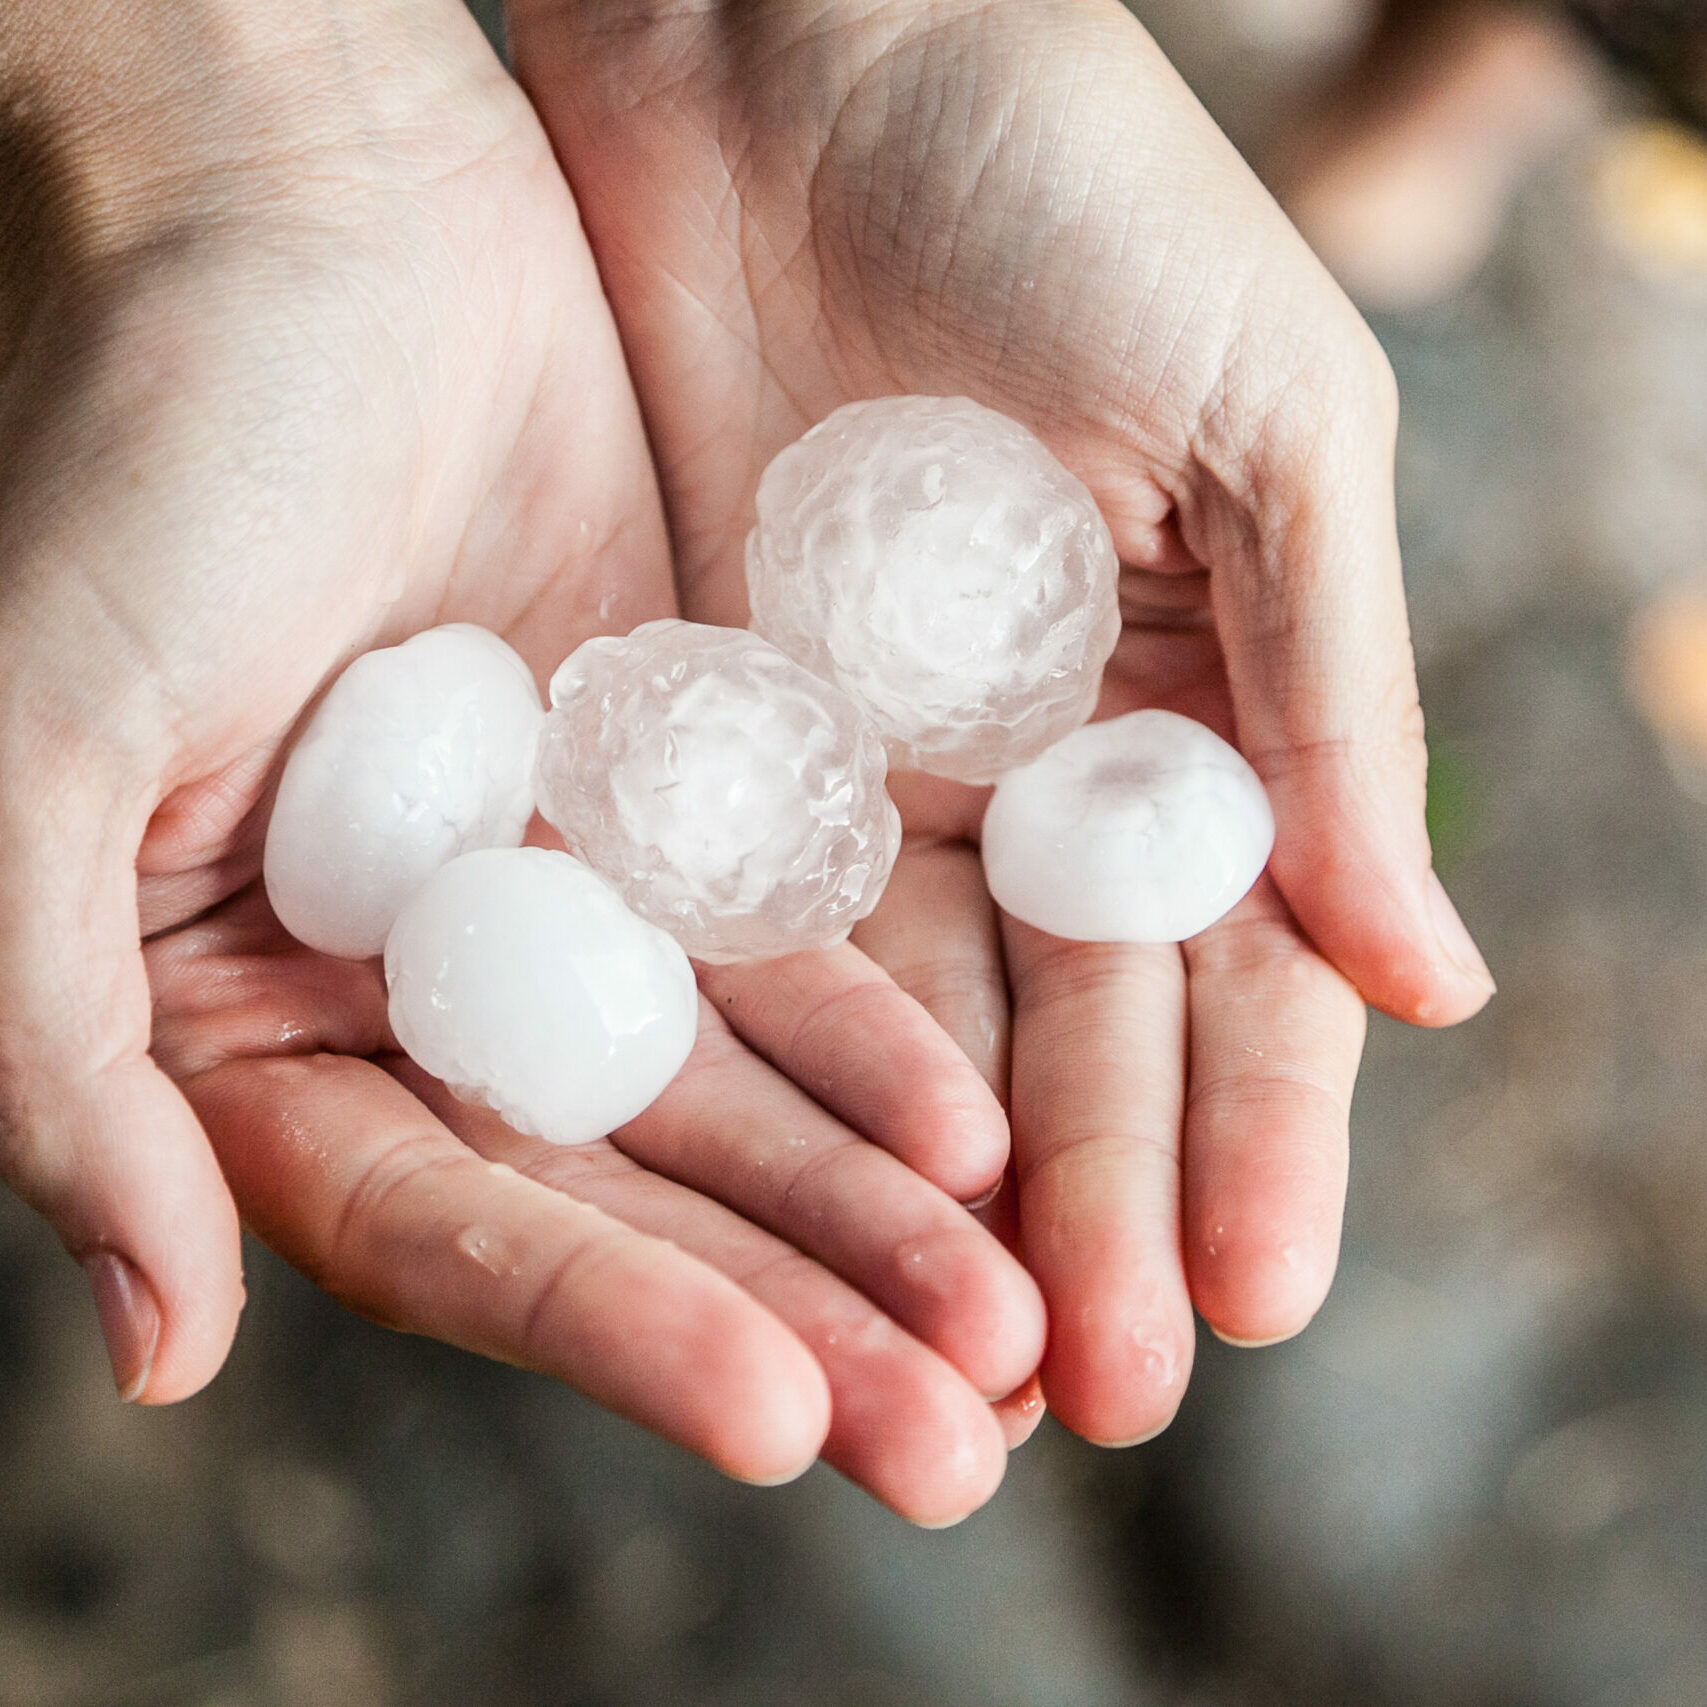 Hands holding hail stones after a hail storm to illustrate scale.